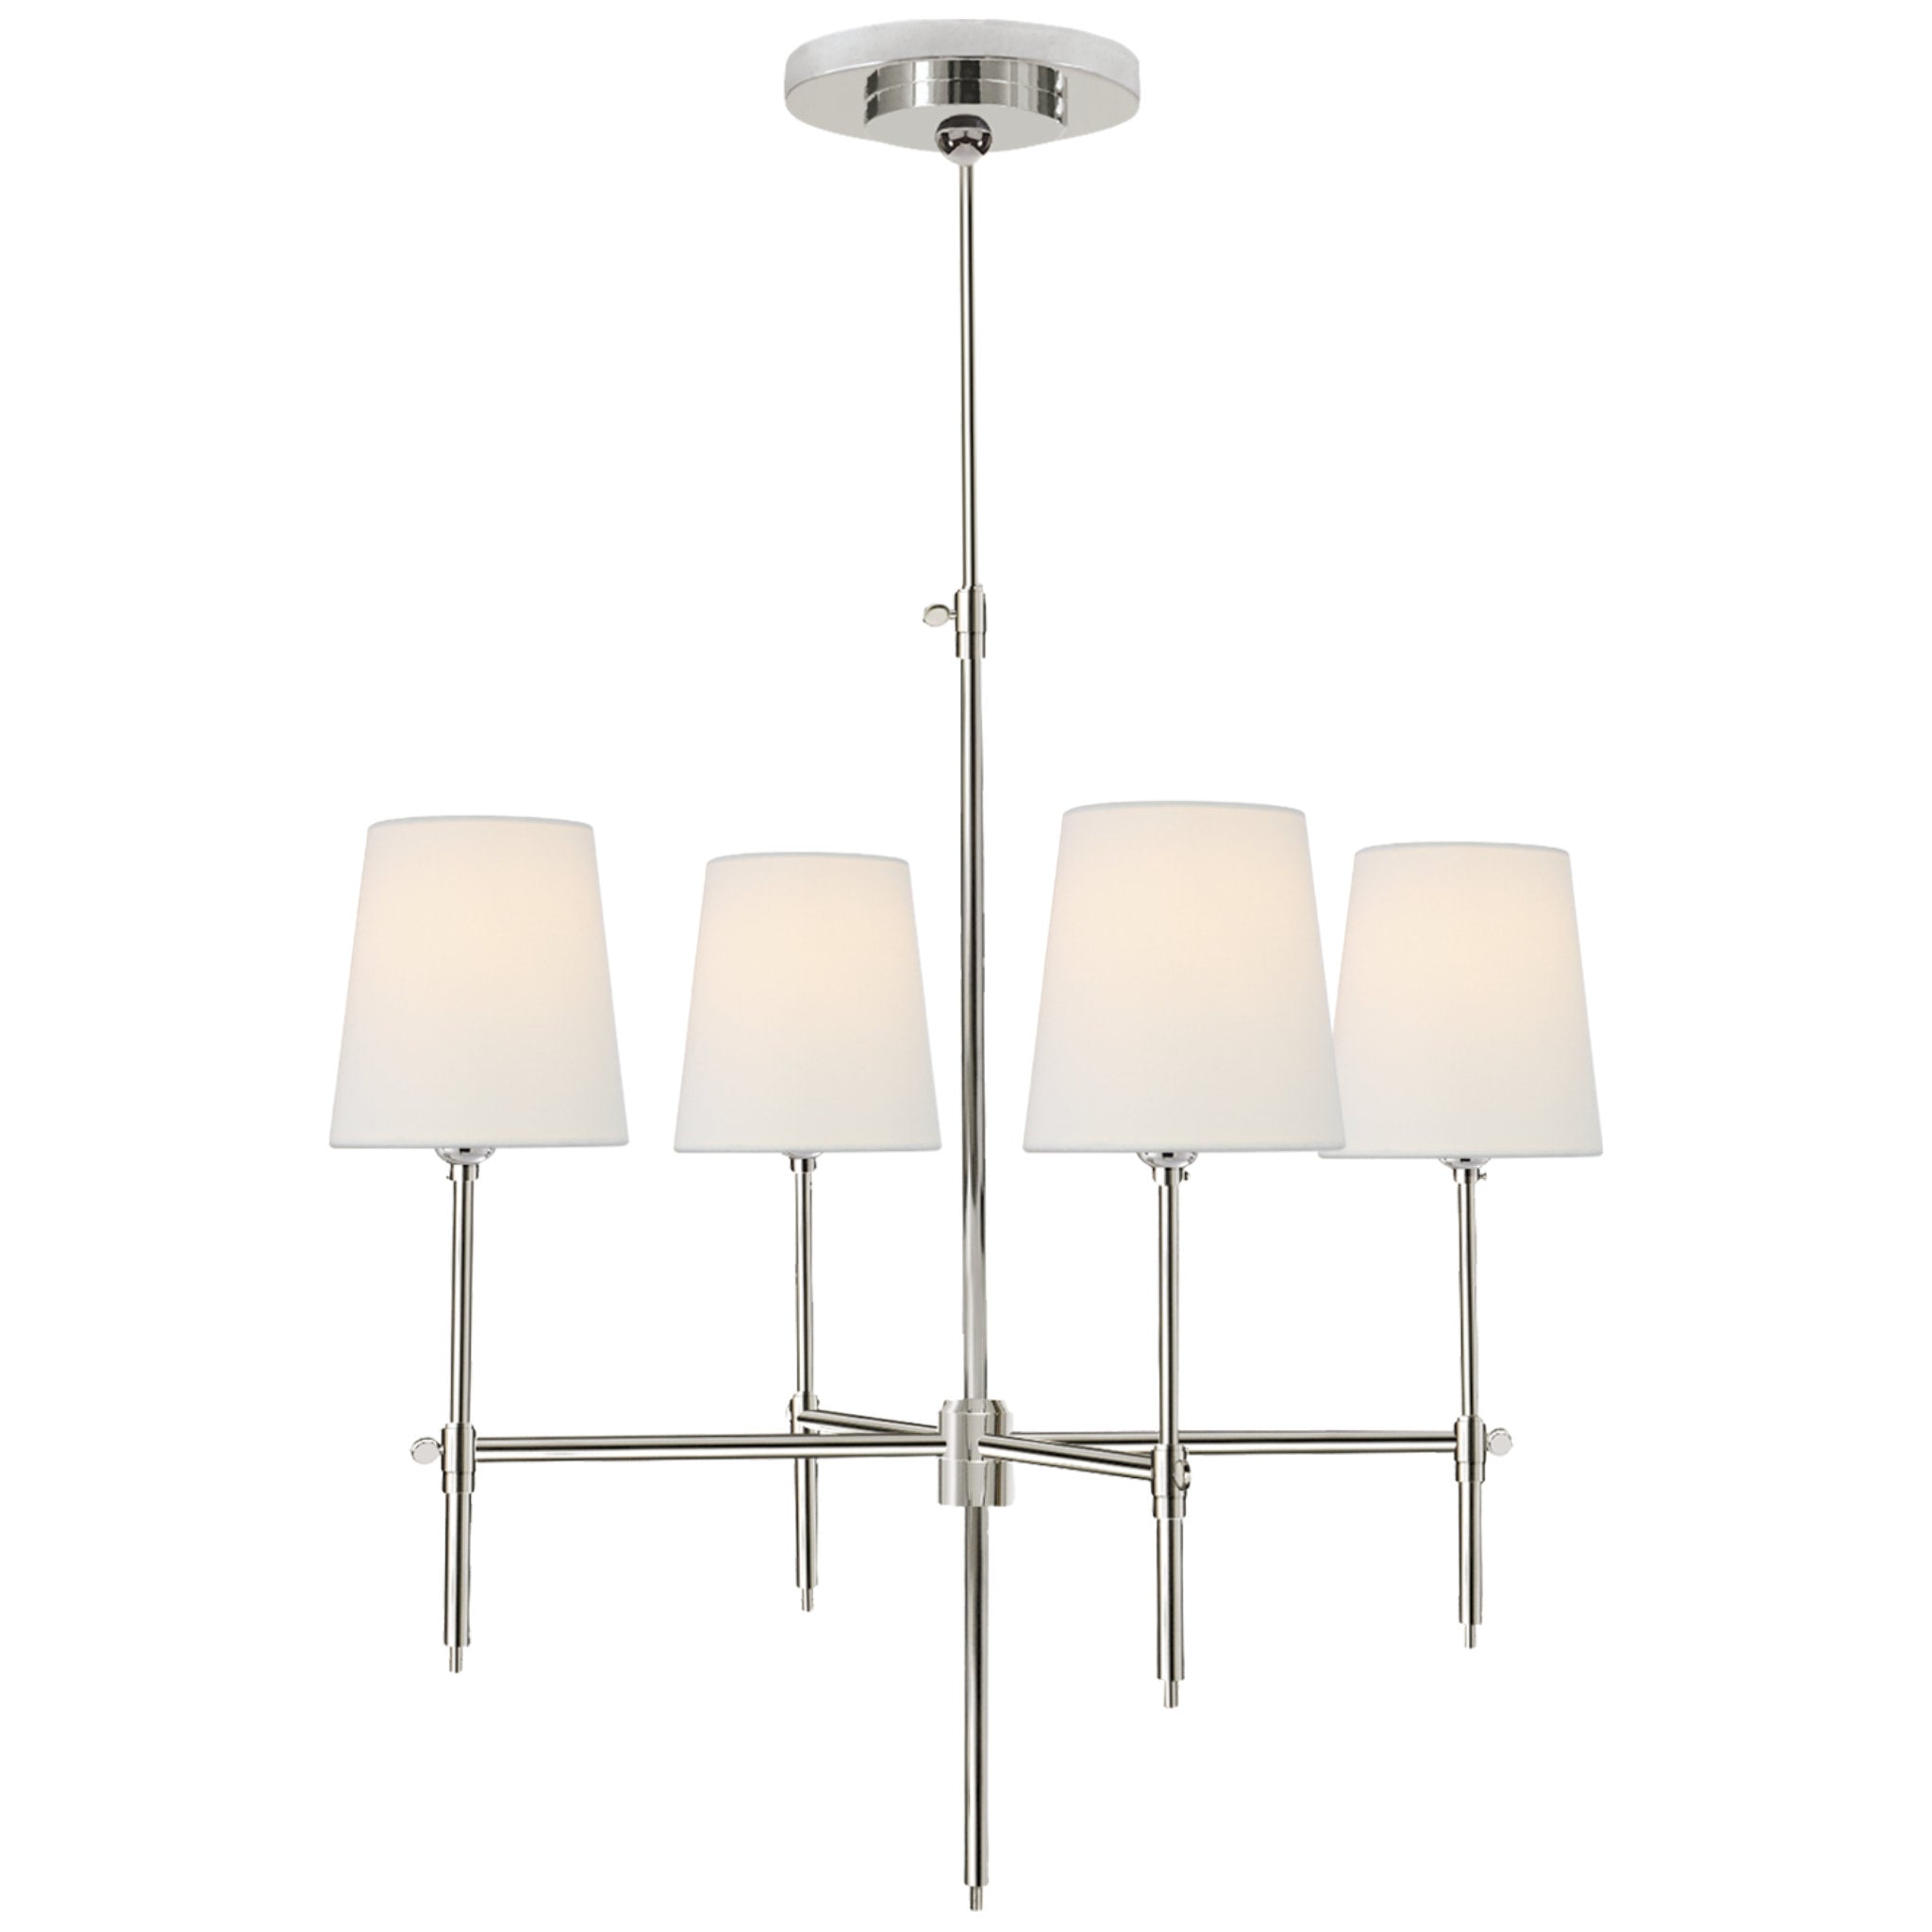 Thomas O'Brien Bryant Small Chandelier in Polished Nickel with Linen Shades